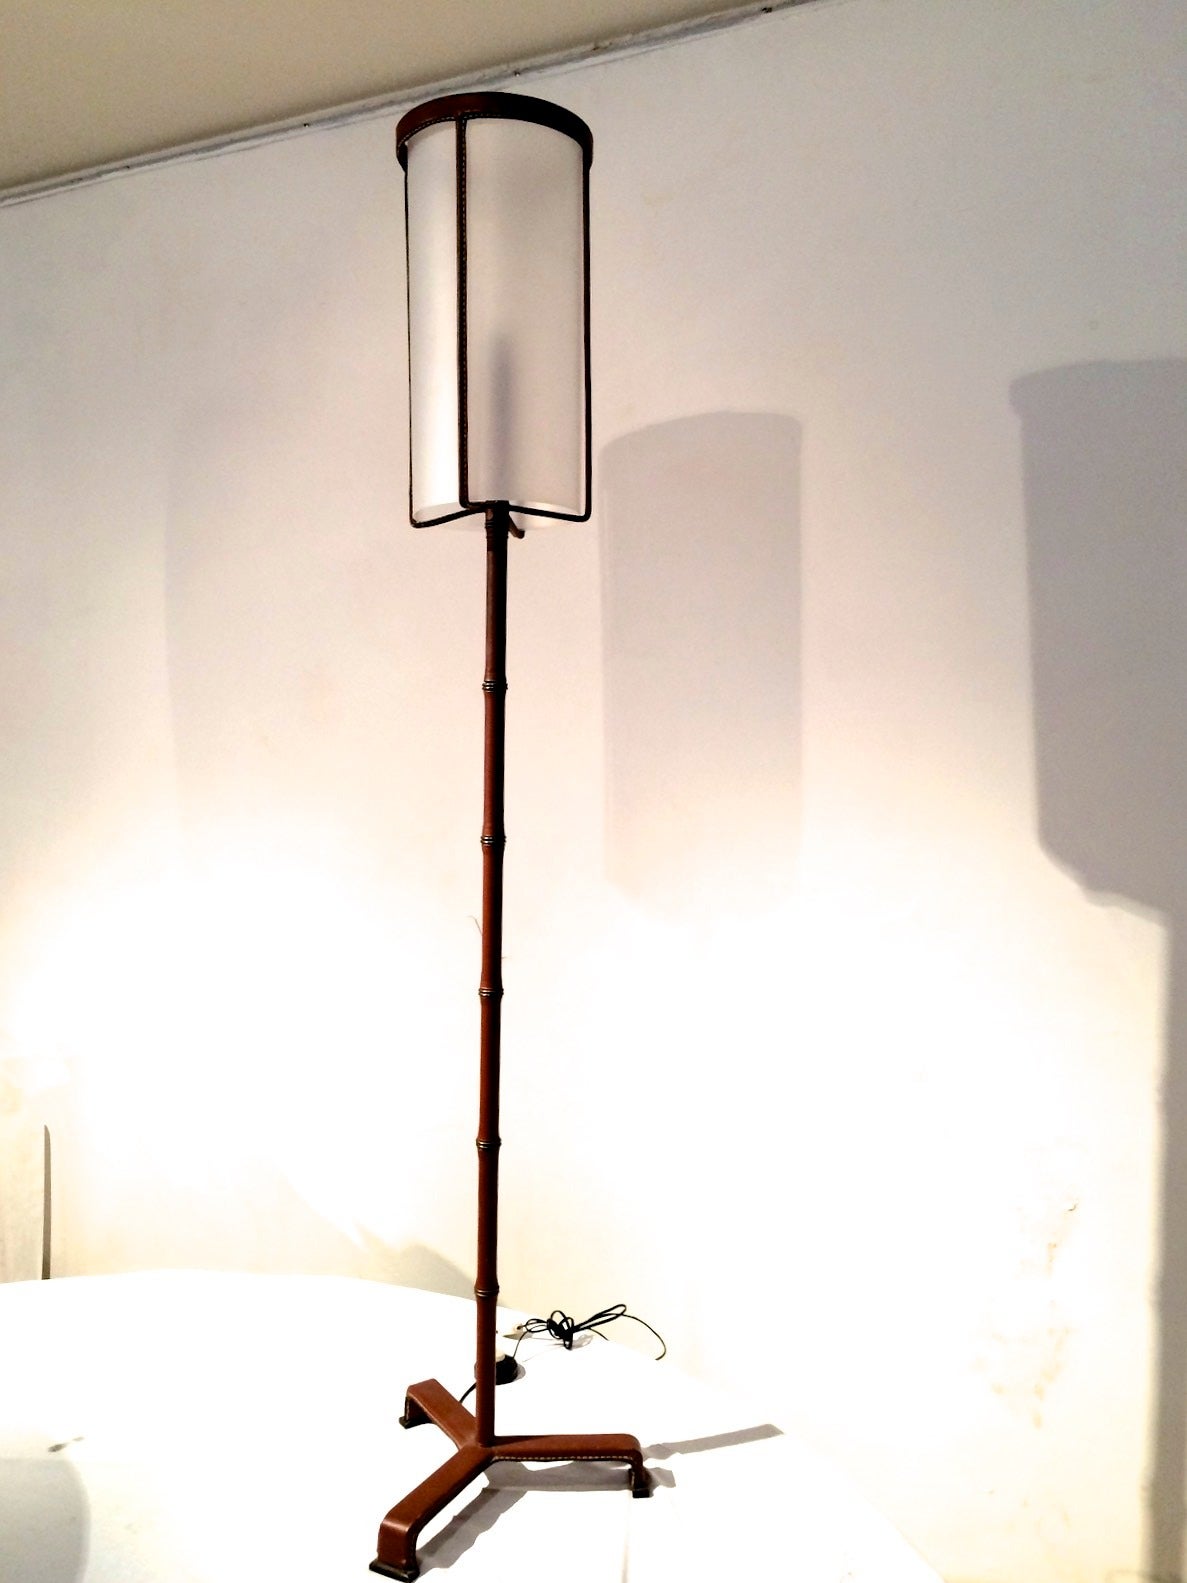 Jacques Adnet rarest brown hand-stitched leather tripod standing lamp.